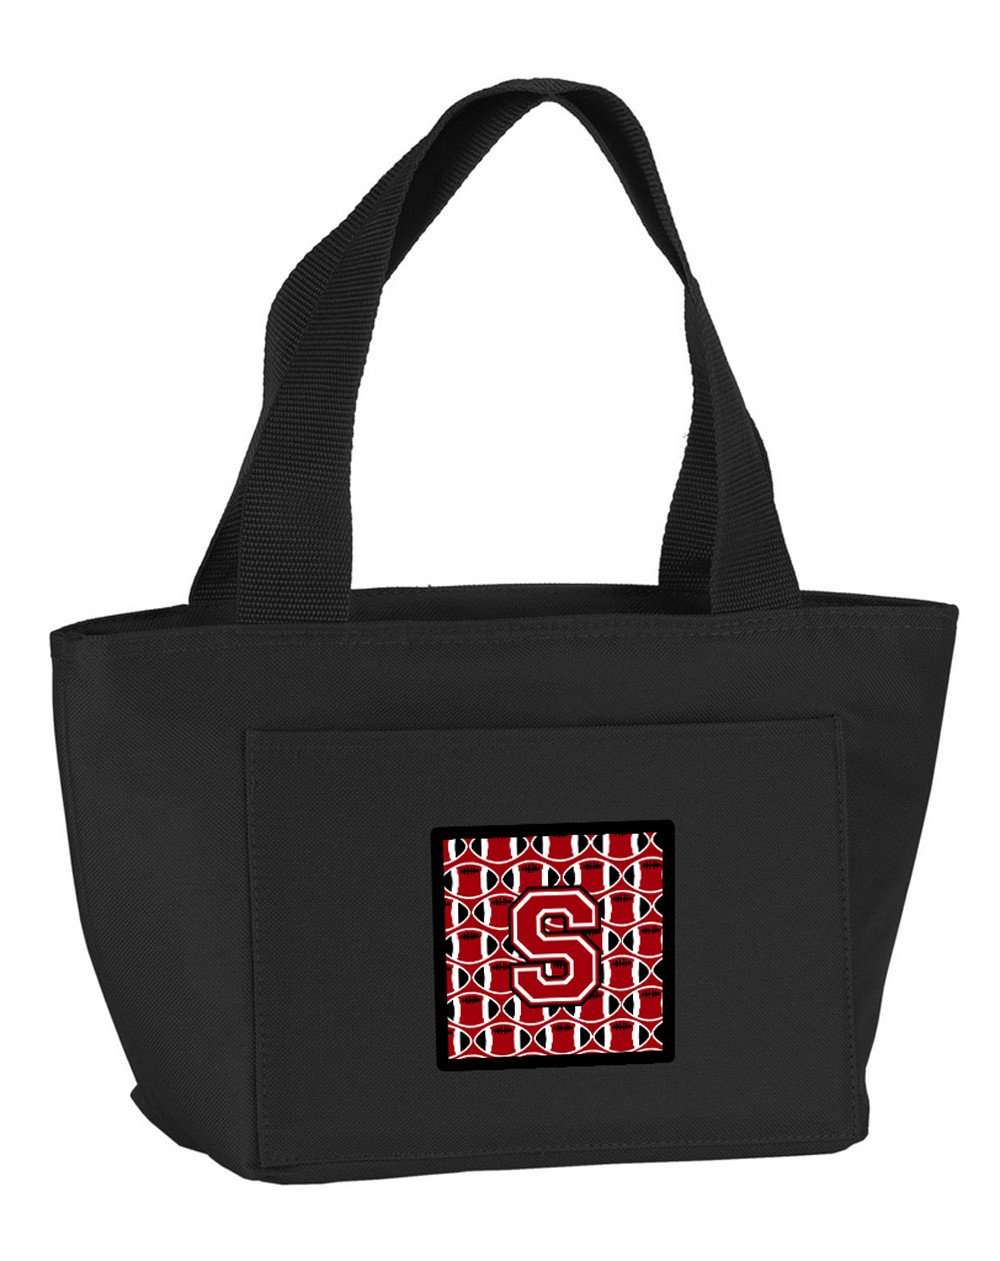 Letter S Football Red, Black and White Lunch Bag CJ1073-SBK-8808 by Caroline's Treasures